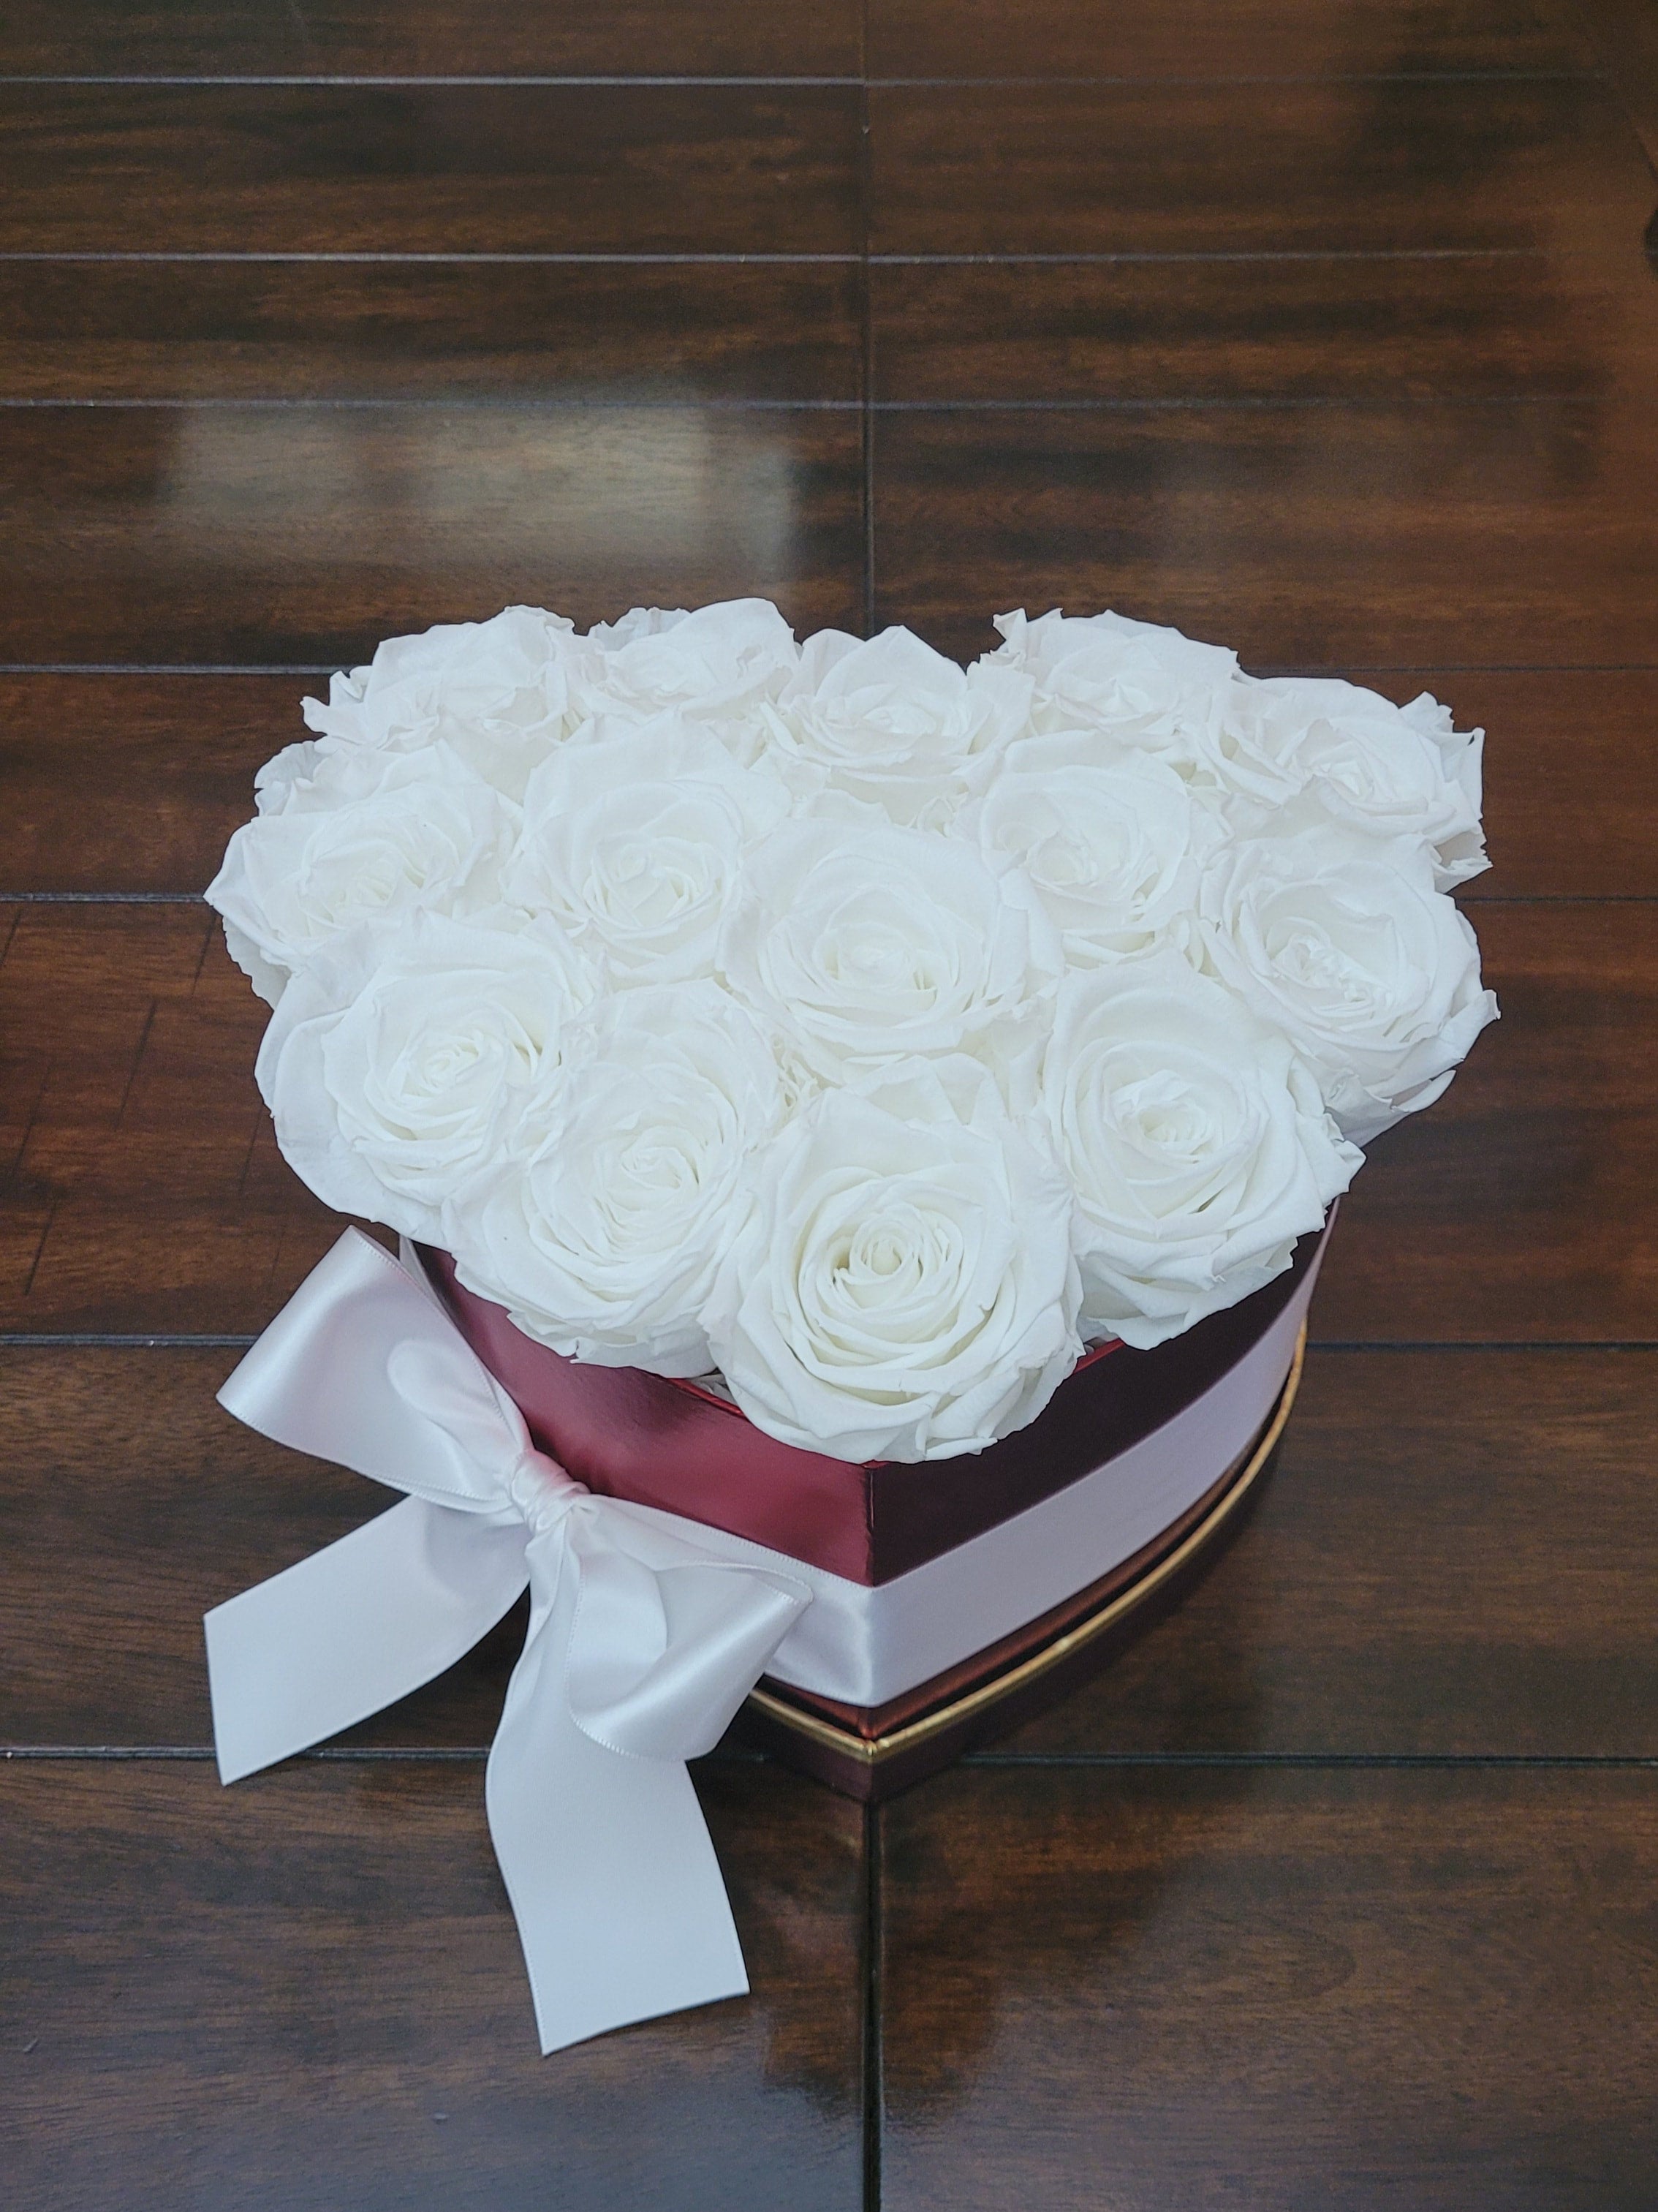 Heart-Shaped Box for Flowers: A Timeless Symbol of Love and Affection –  Eternal Roses®